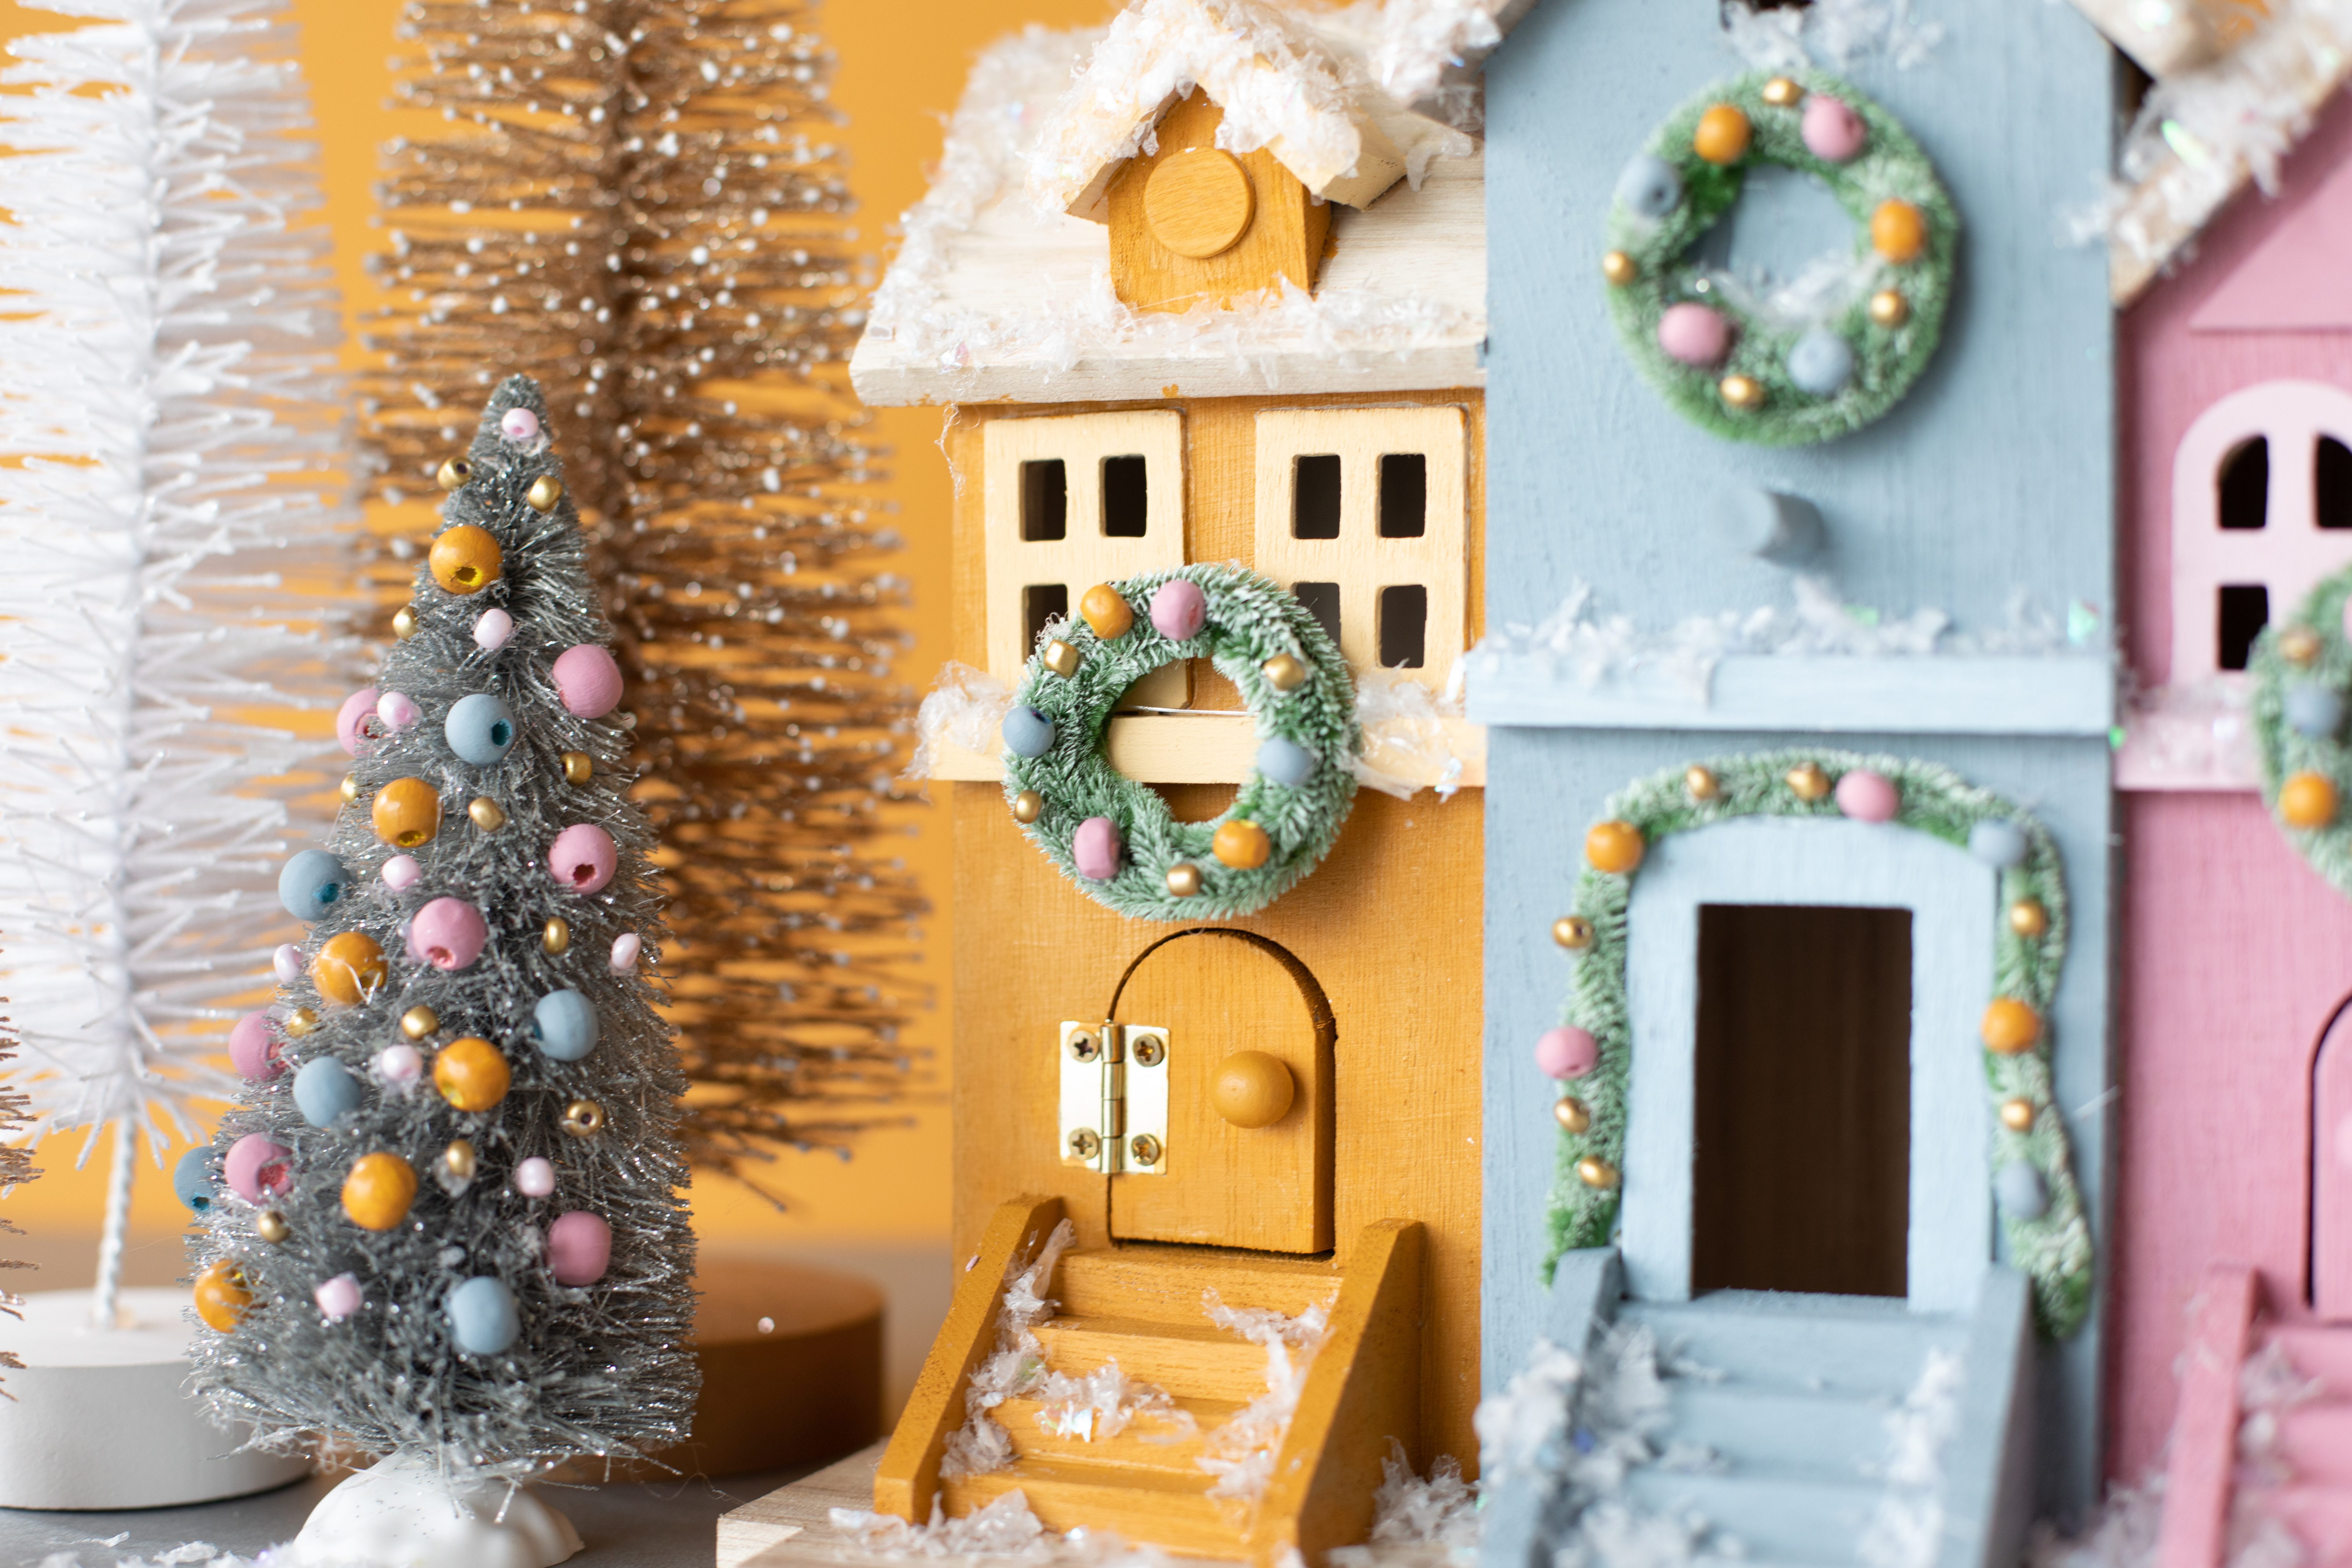 Holiday Brownstone: How to Make Your Own DIY Christmas Village + a tutorial featured by Top US Craft Blog + The Pretty Life Girls